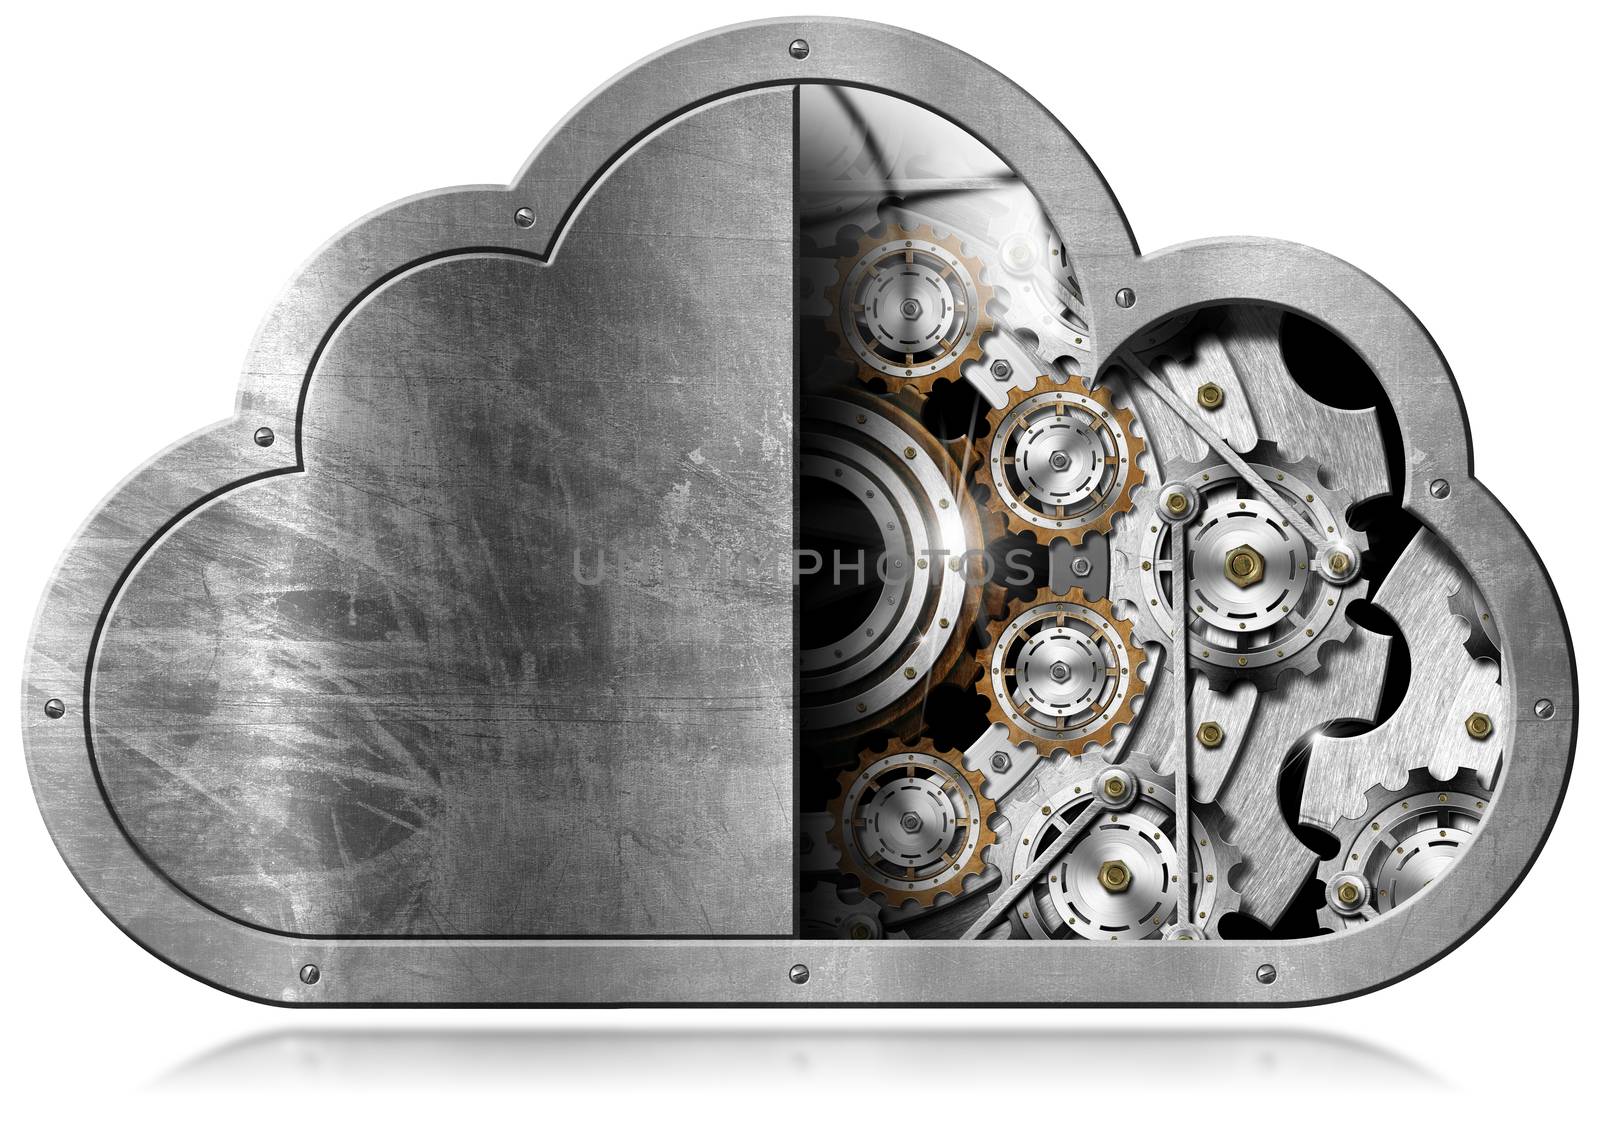 Metallic symbol in the shape of a cloud with metal gears. Concept of cloud computing